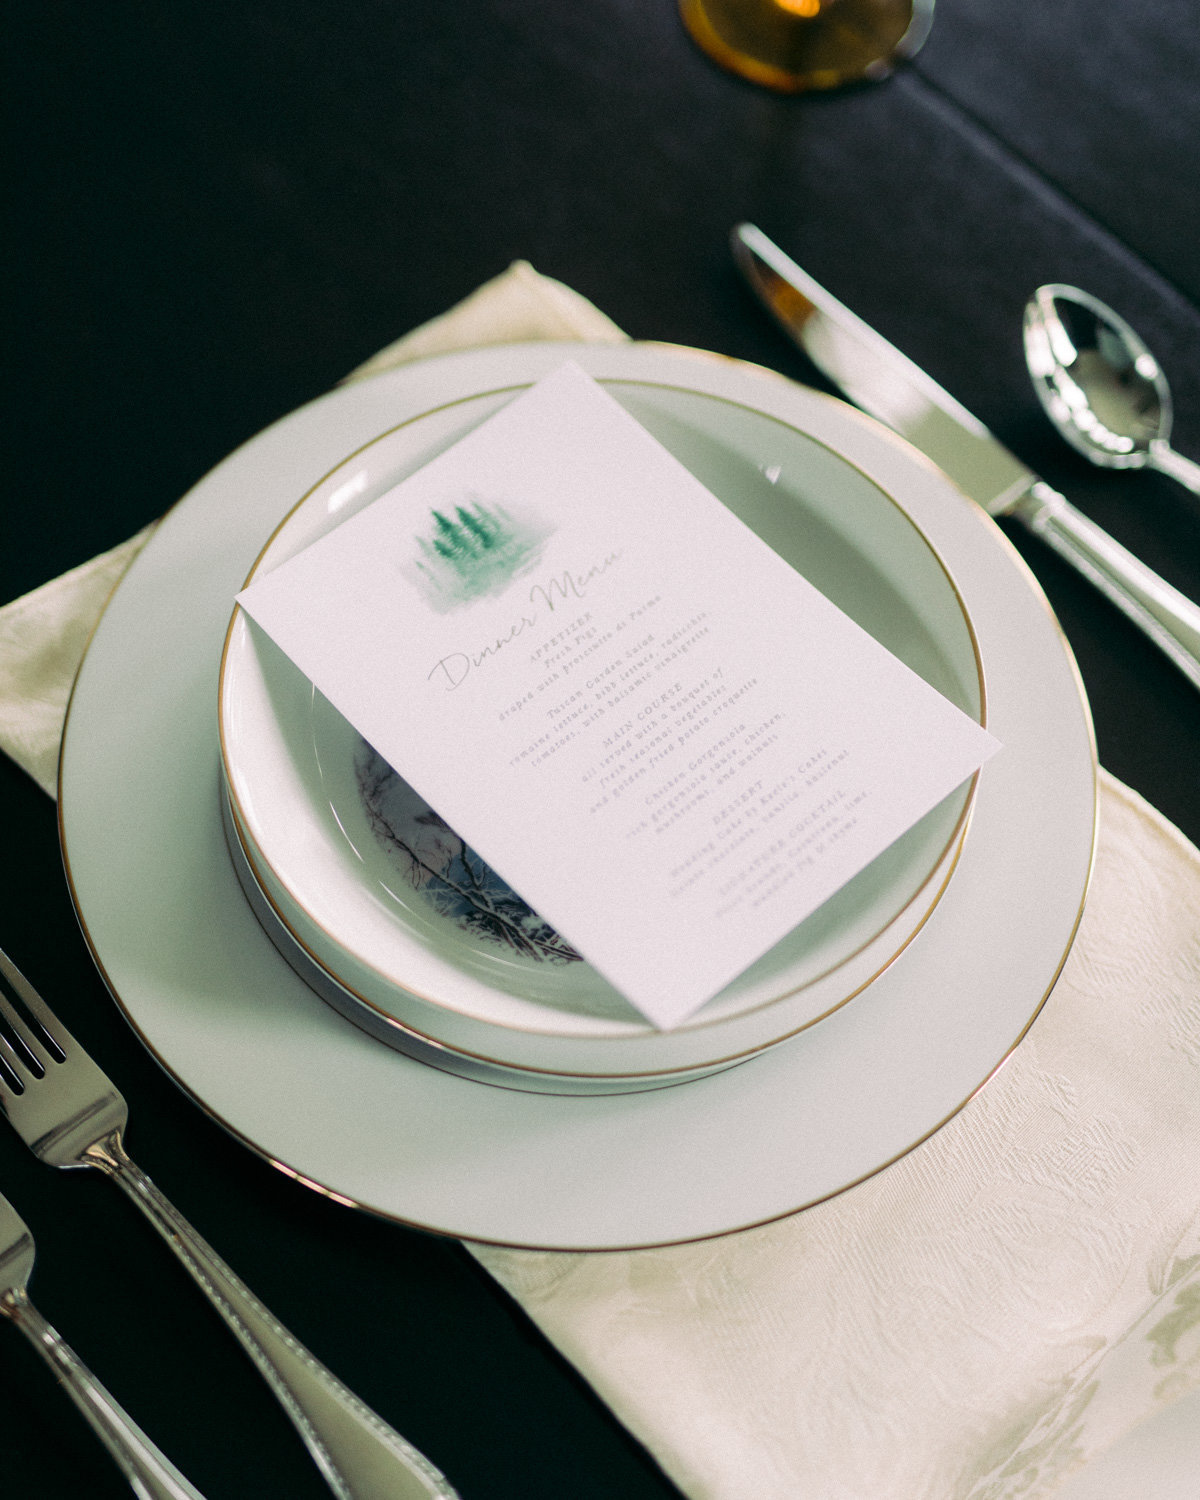 Close-Up of Elegant Gold-Trimmed China Plates and Menu at Venue3two